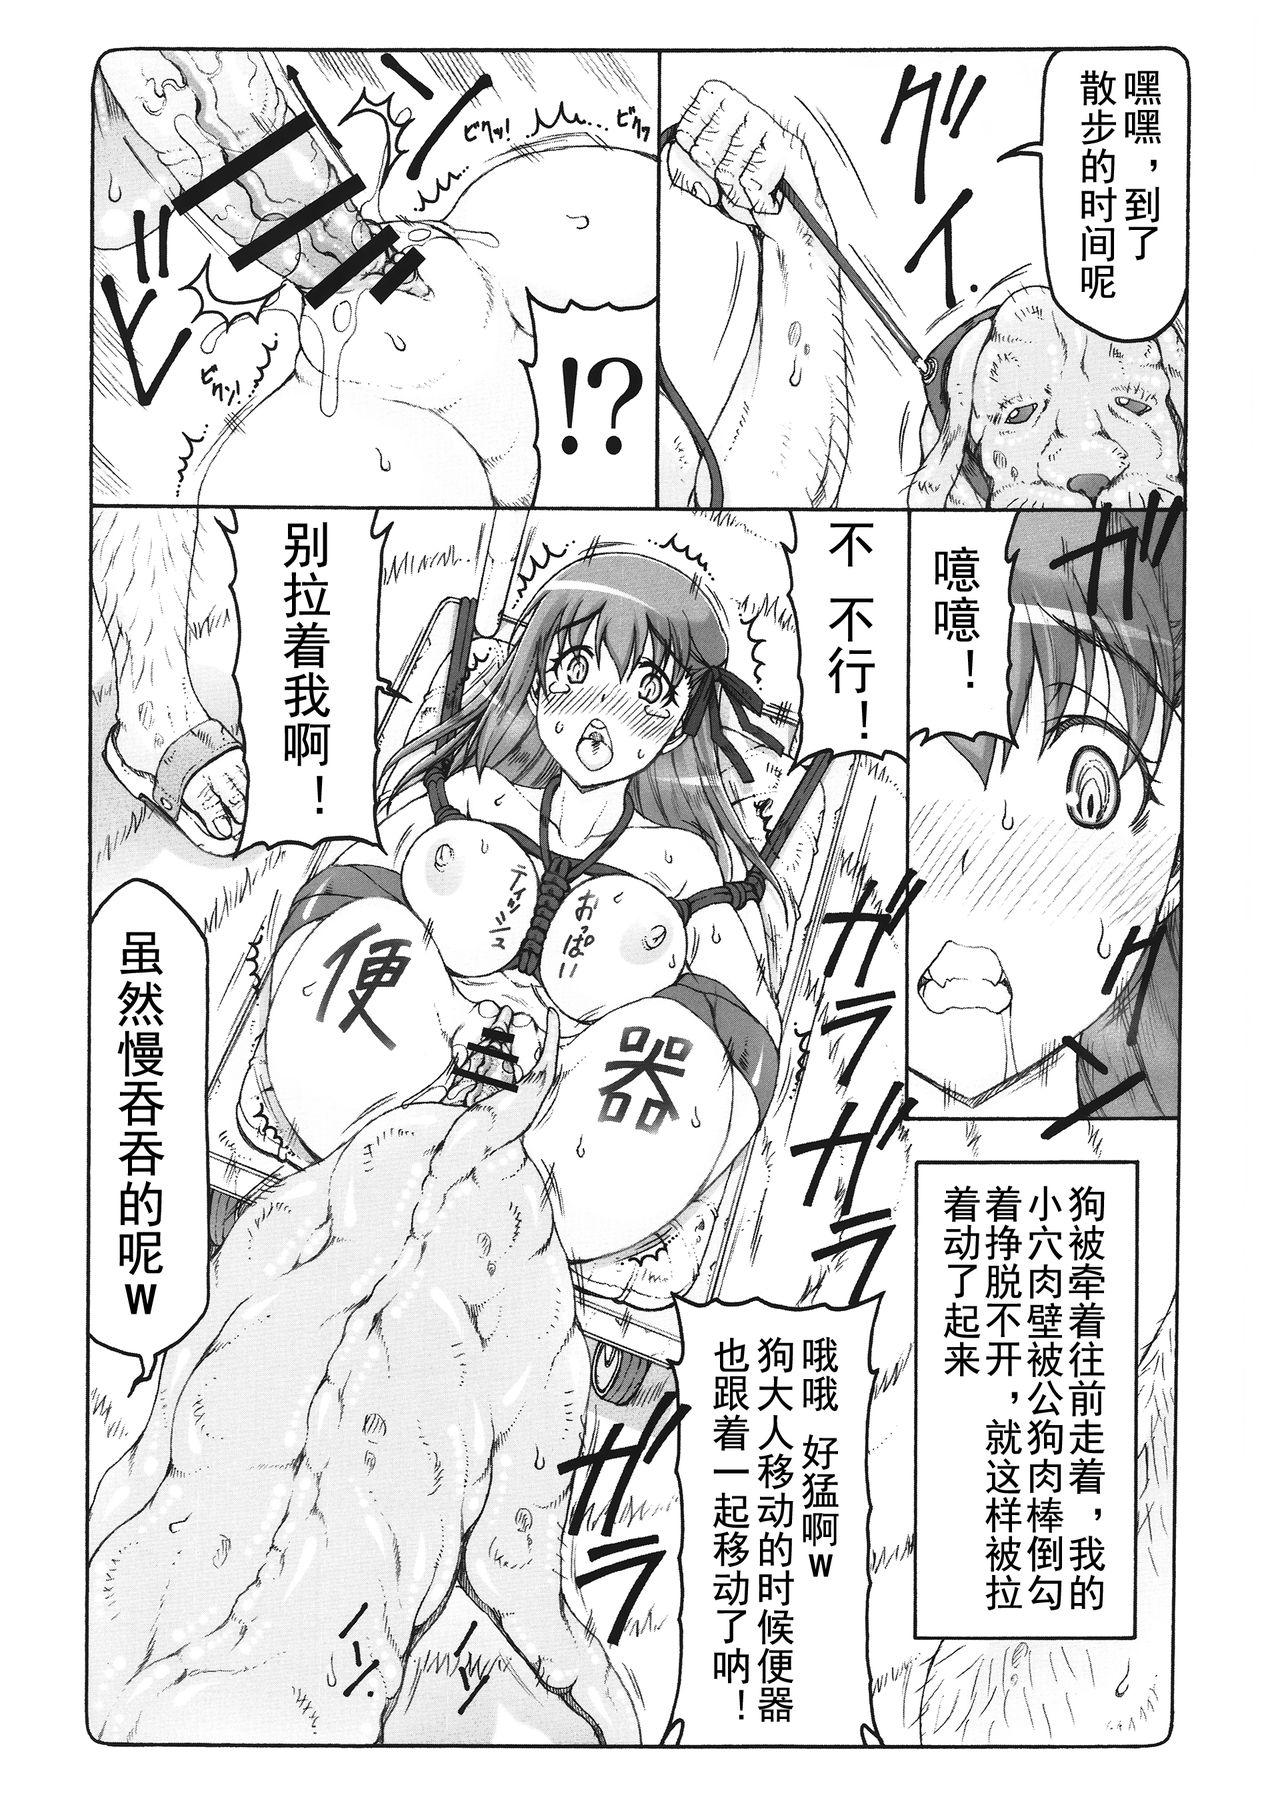 Lesbos Kotori 14 - Fate stay night Young Petite Porn - Page 8